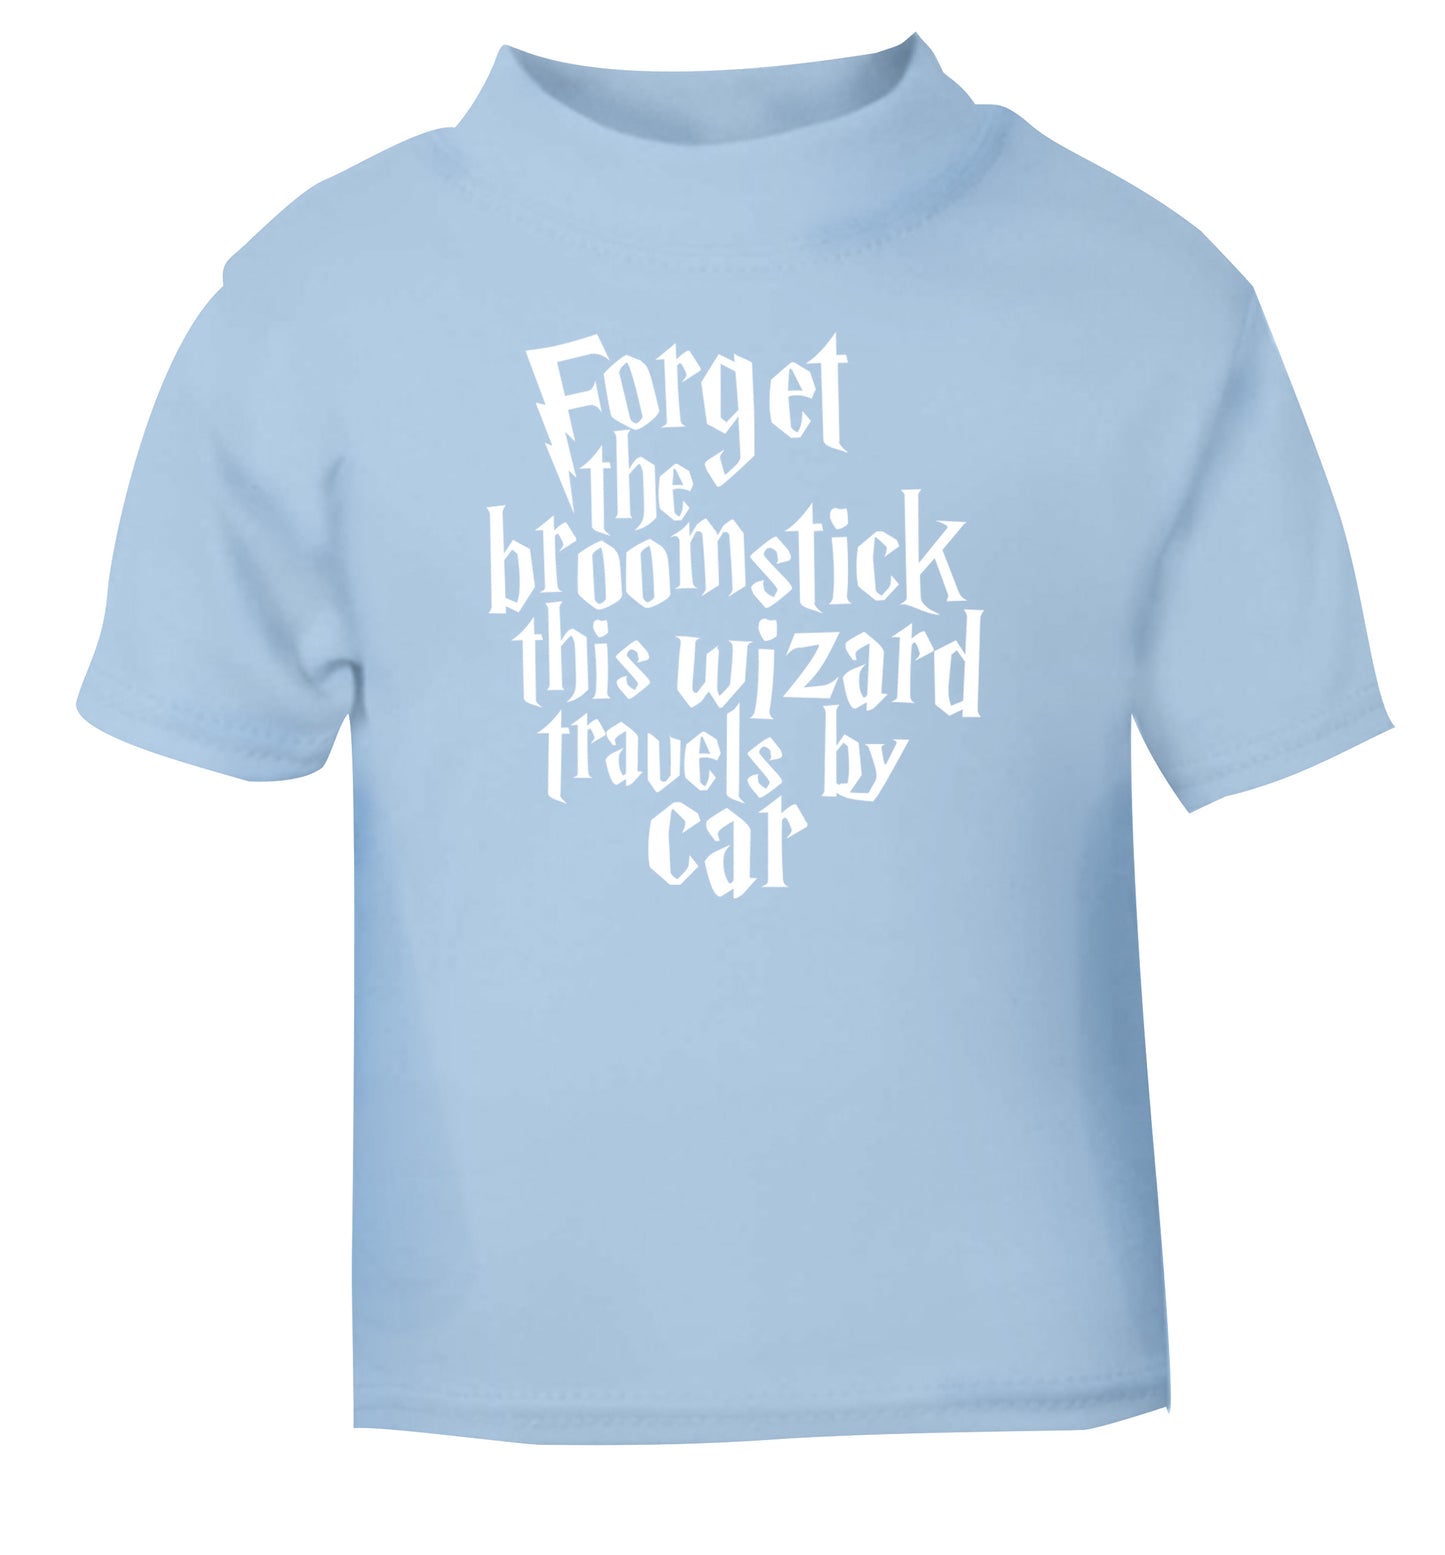 Forget the broomstick this wizard travels by car light blue Baby Toddler Tshirt 2 Years